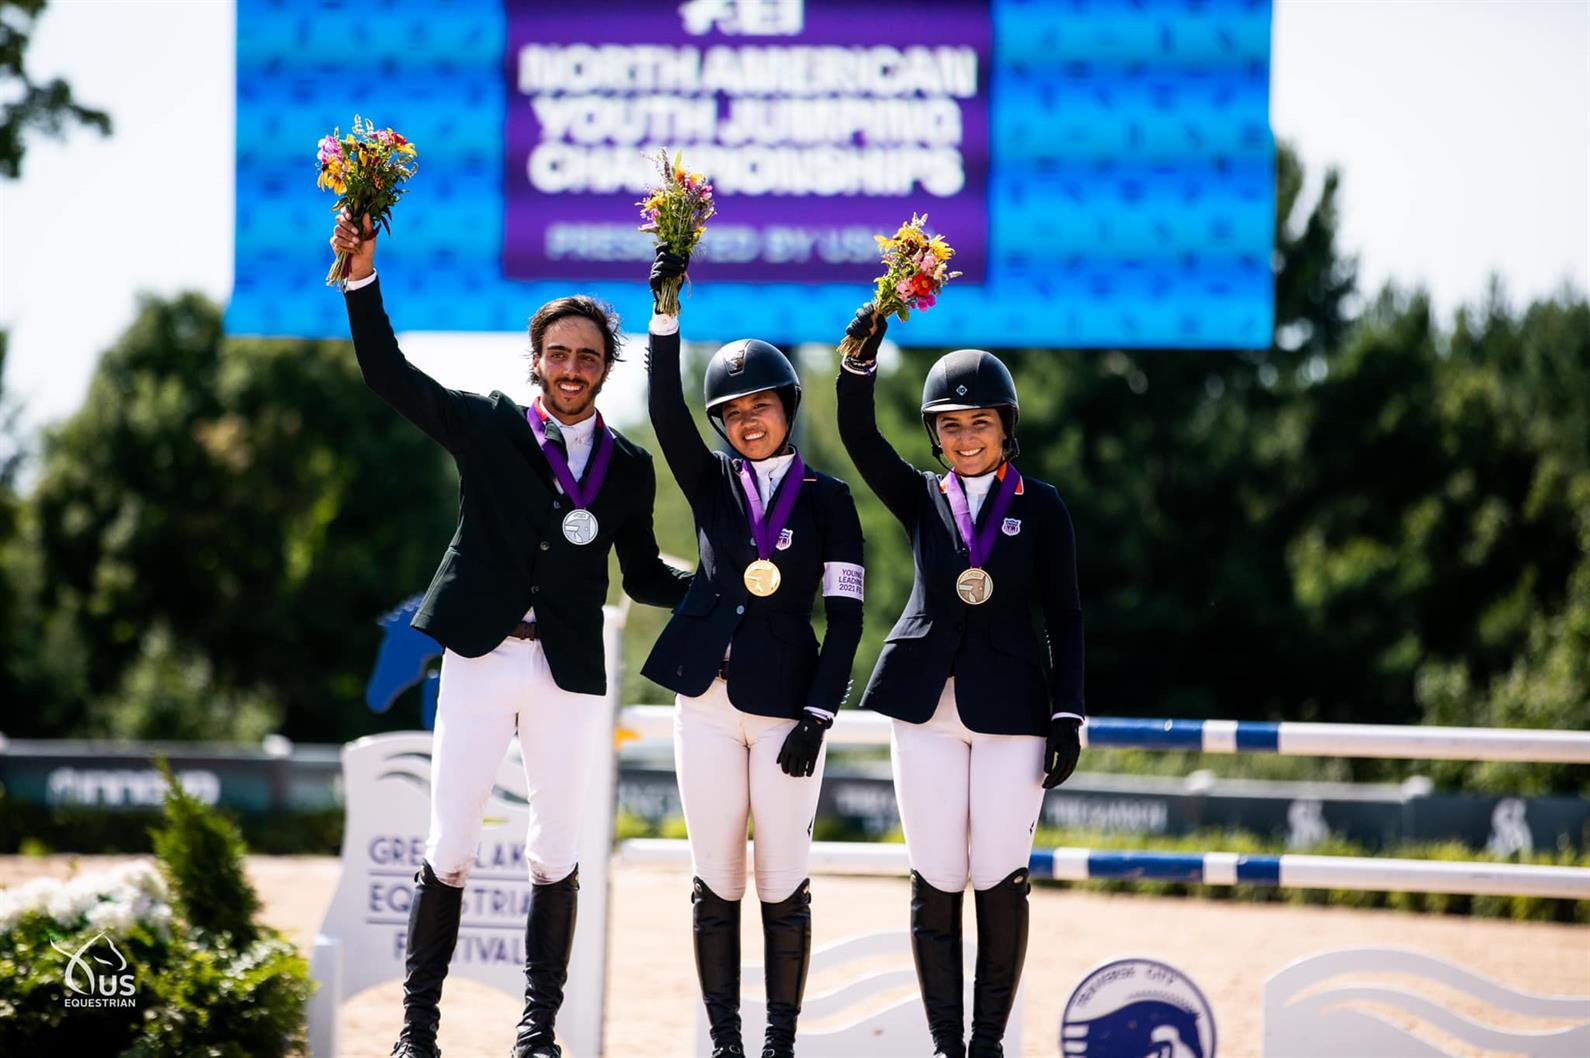 Zayna Rizvi and Mimi Gochman Are Golden on Concluding Day of Gotham North FEI North American Youth Jumping Championships, presented by USHJA